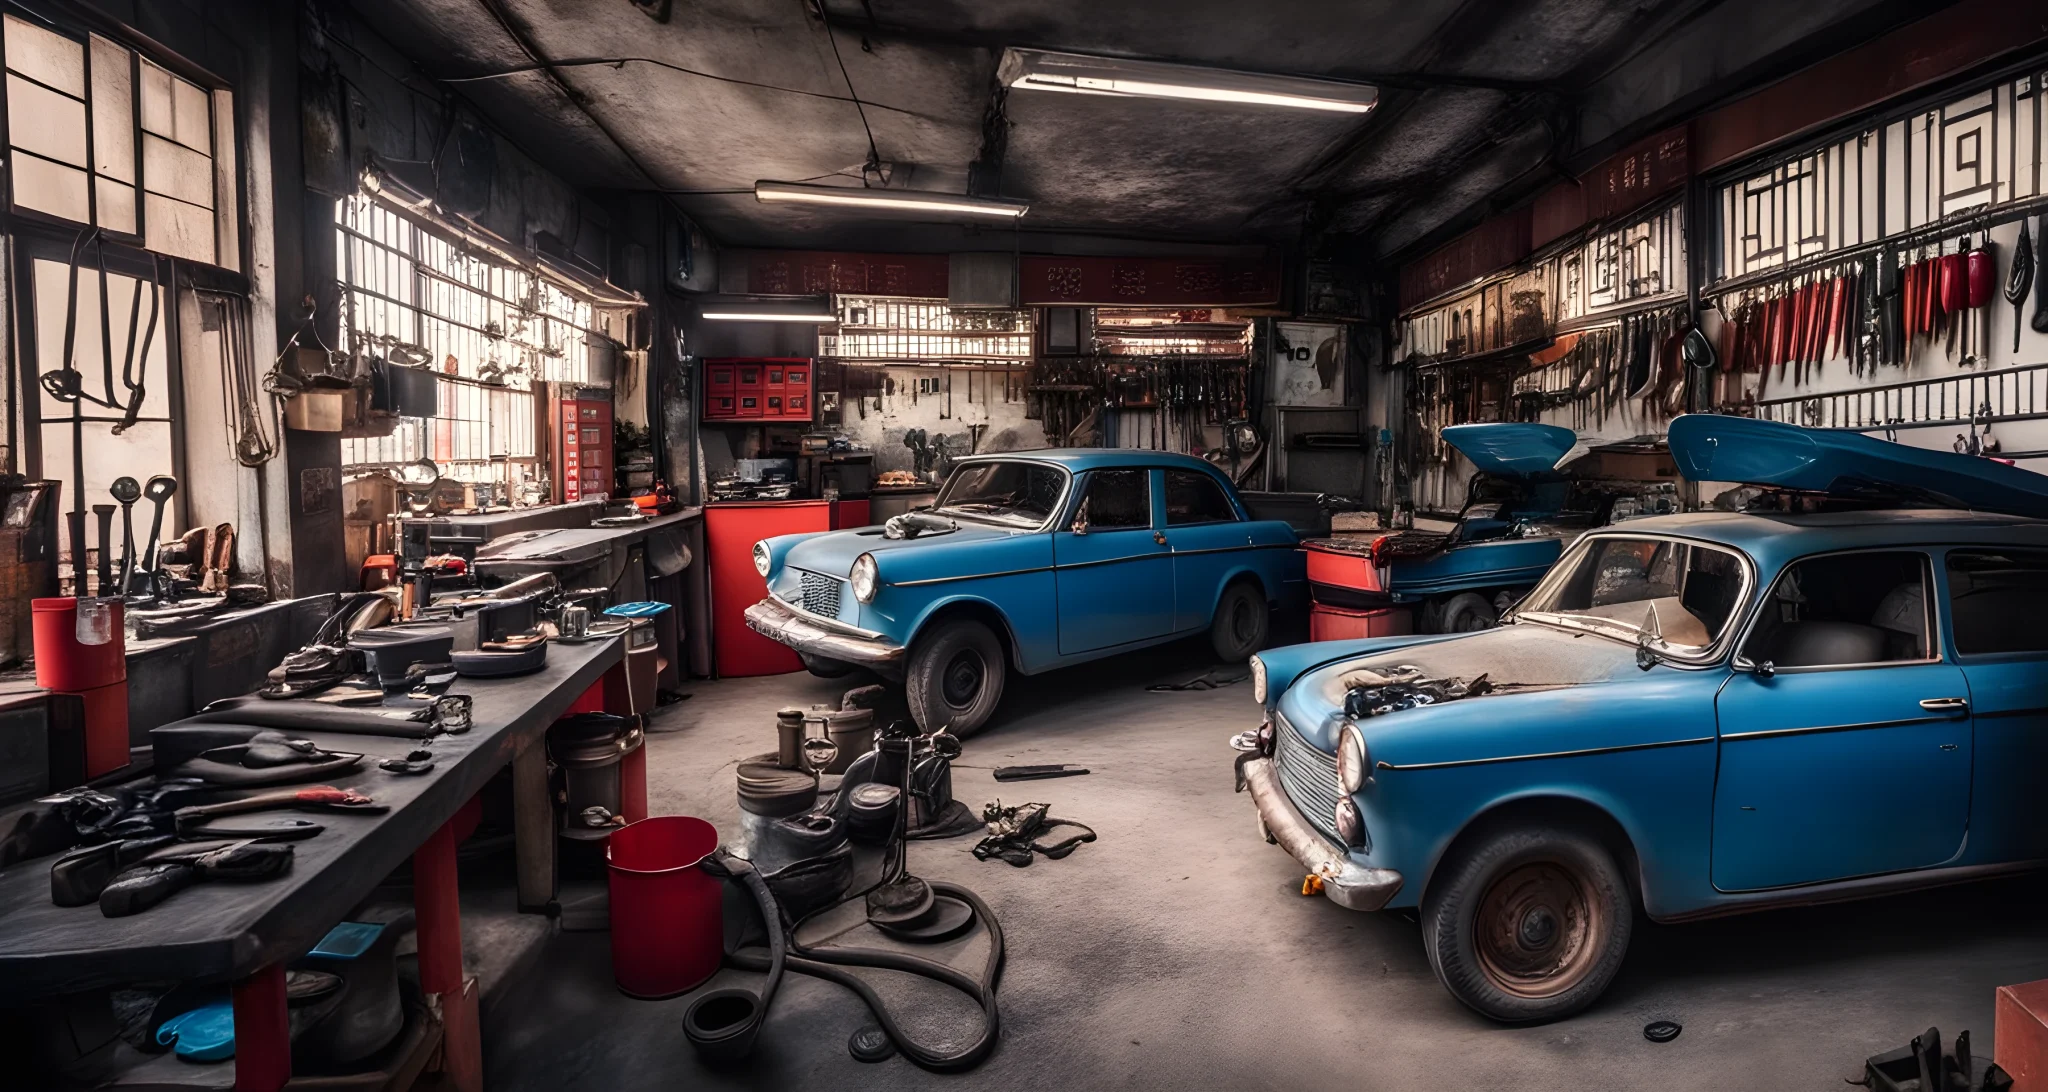 The image shows a small, local car repair shop in China with a variety of tools and equipment on display.